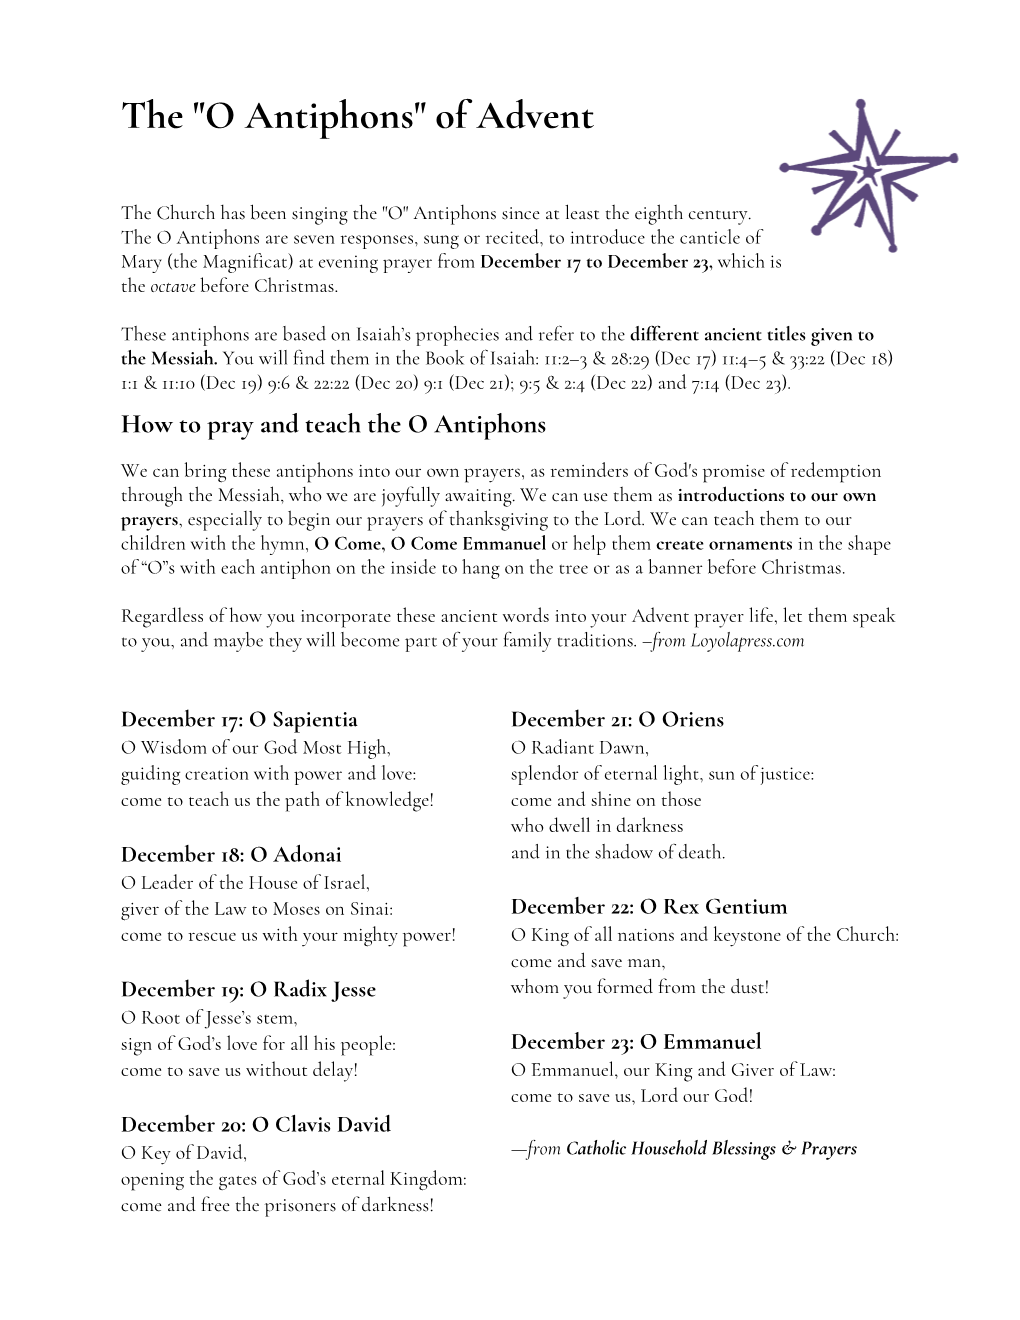 O Antiphons" of Advent